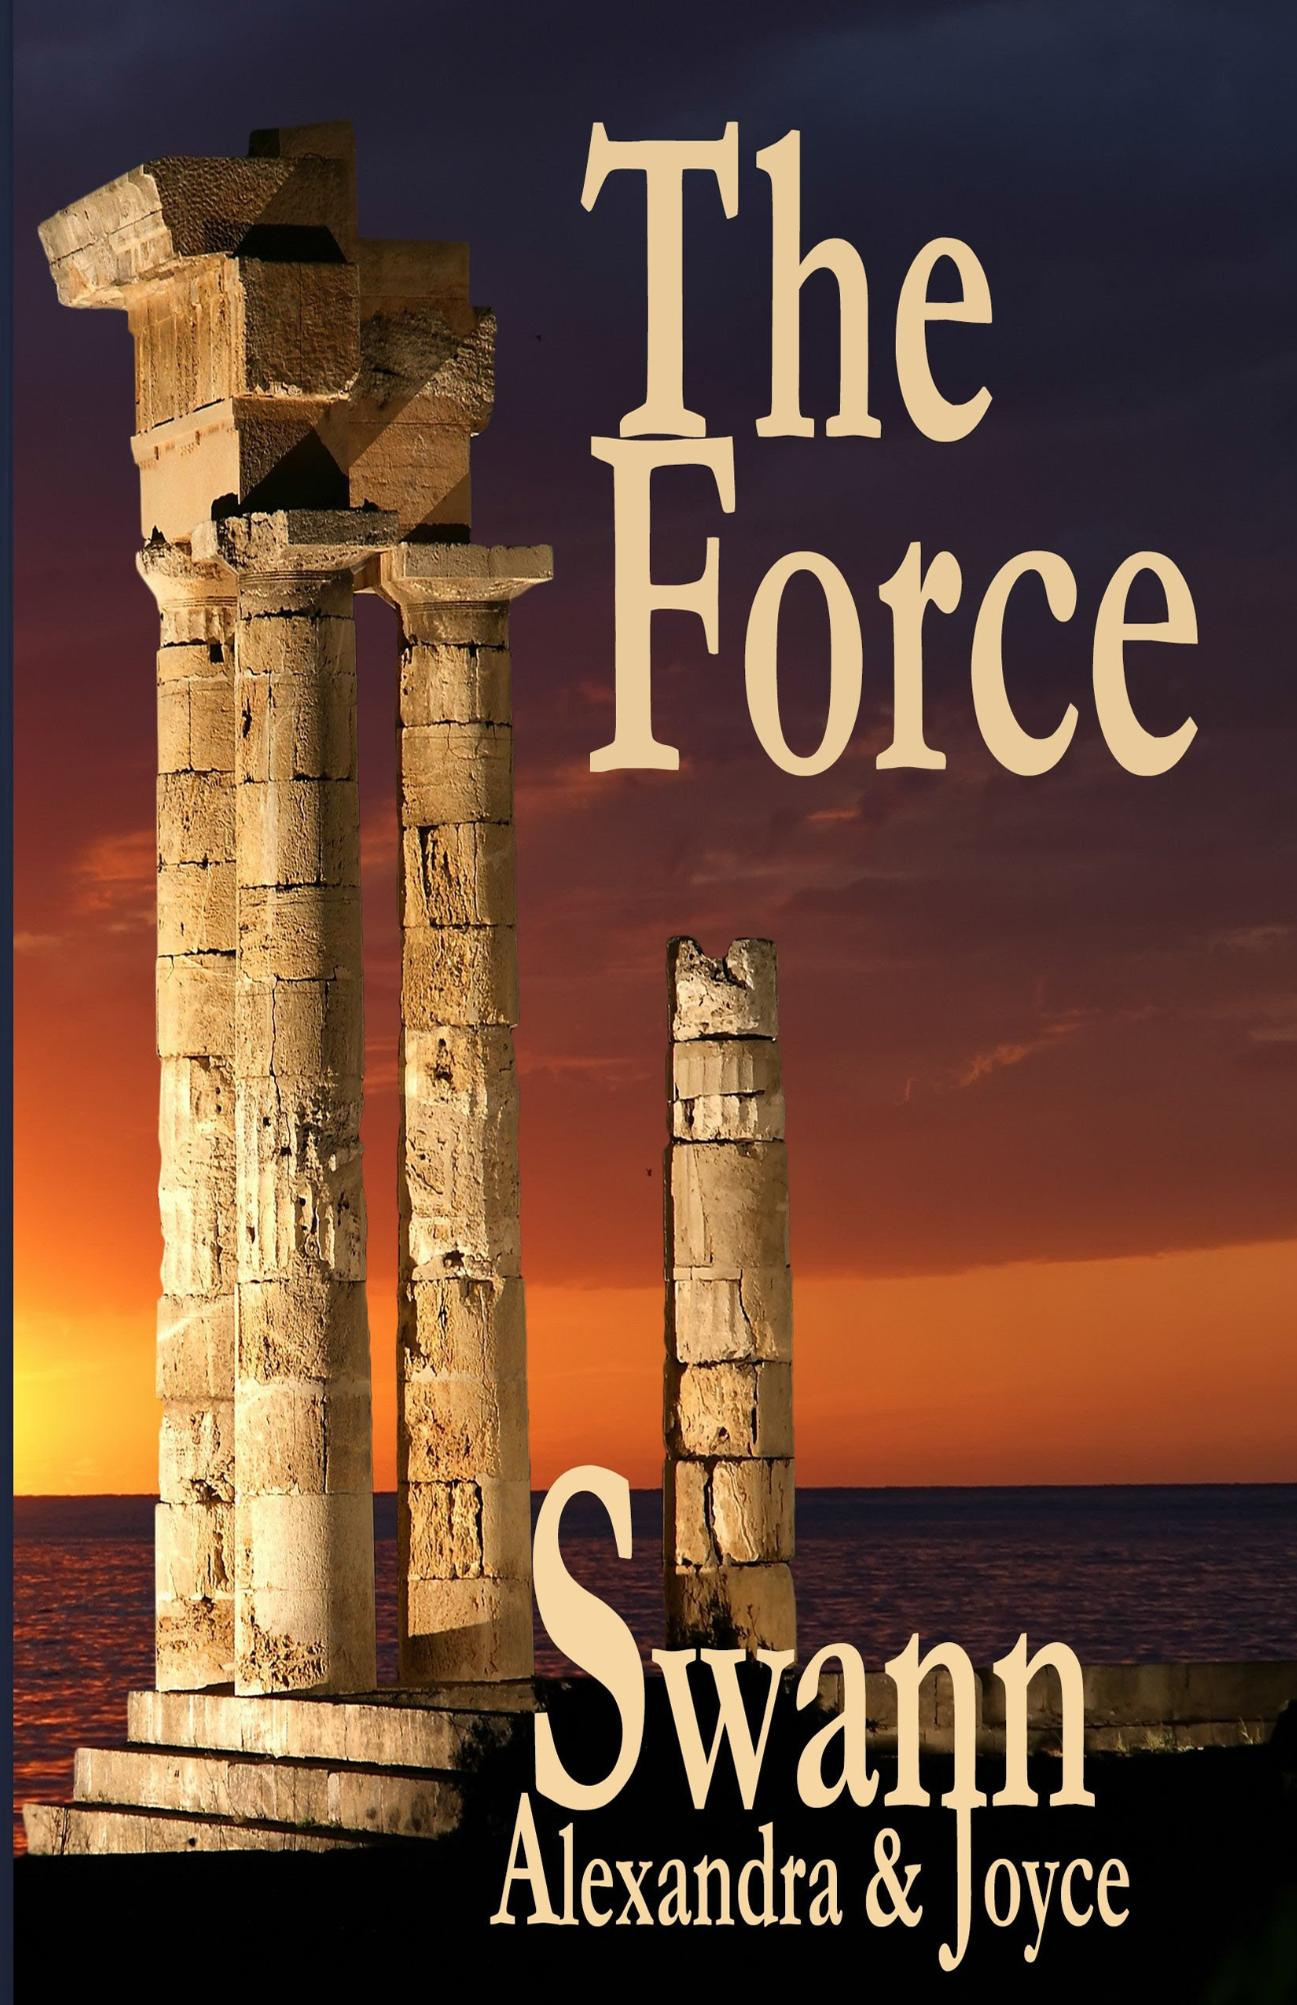 https://0201.nccdn.net/1_2/000/000/198/a24/The_Force_Cover_for_Kindle-1297x2005.jpg